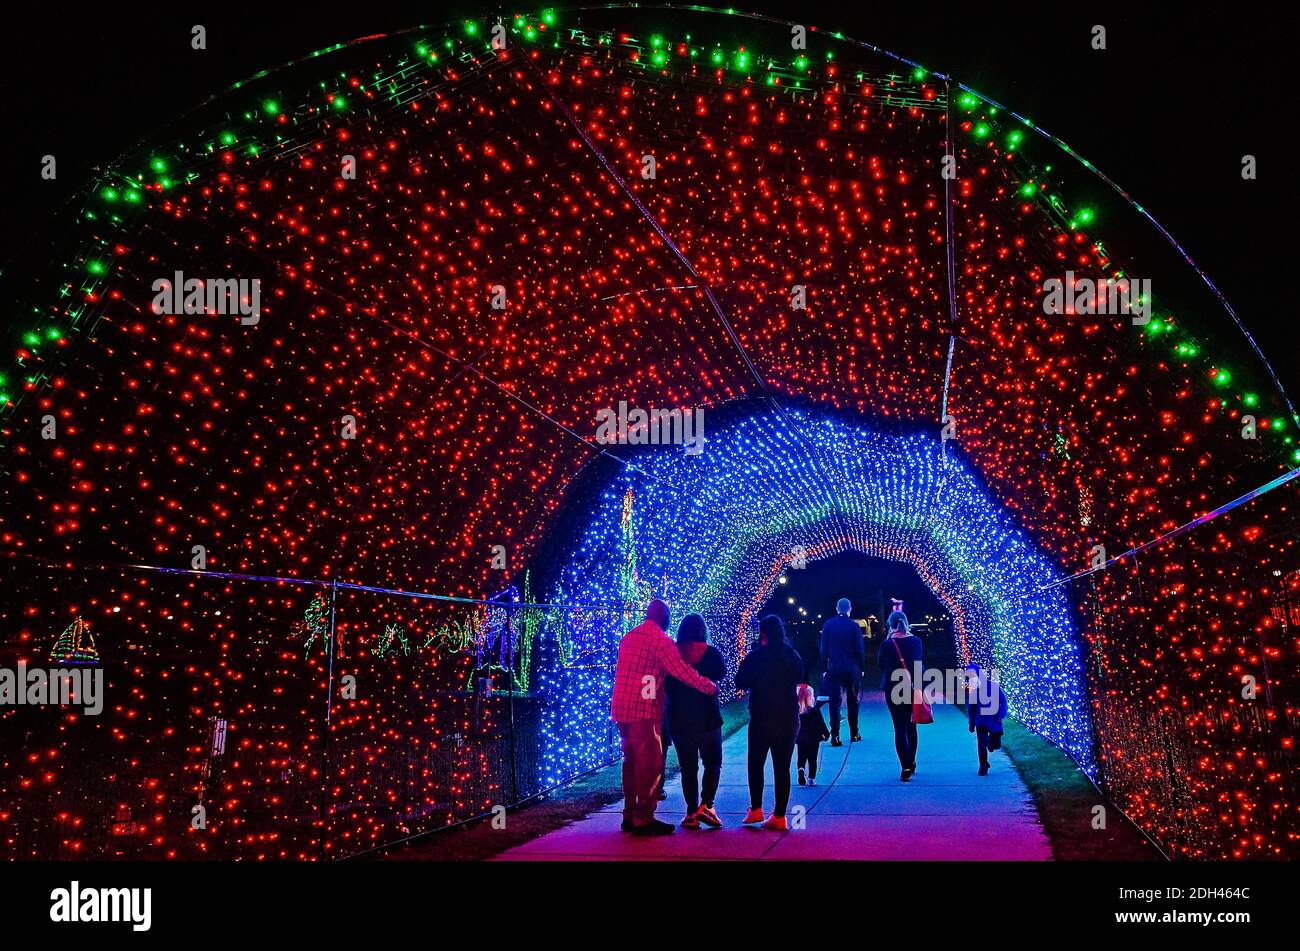 People walk through a LED Christmas lights tunnel during a holiday celebration in Jones Park, Dec. 5, 2020, in Gulfport, Mississippi. Stock Photo